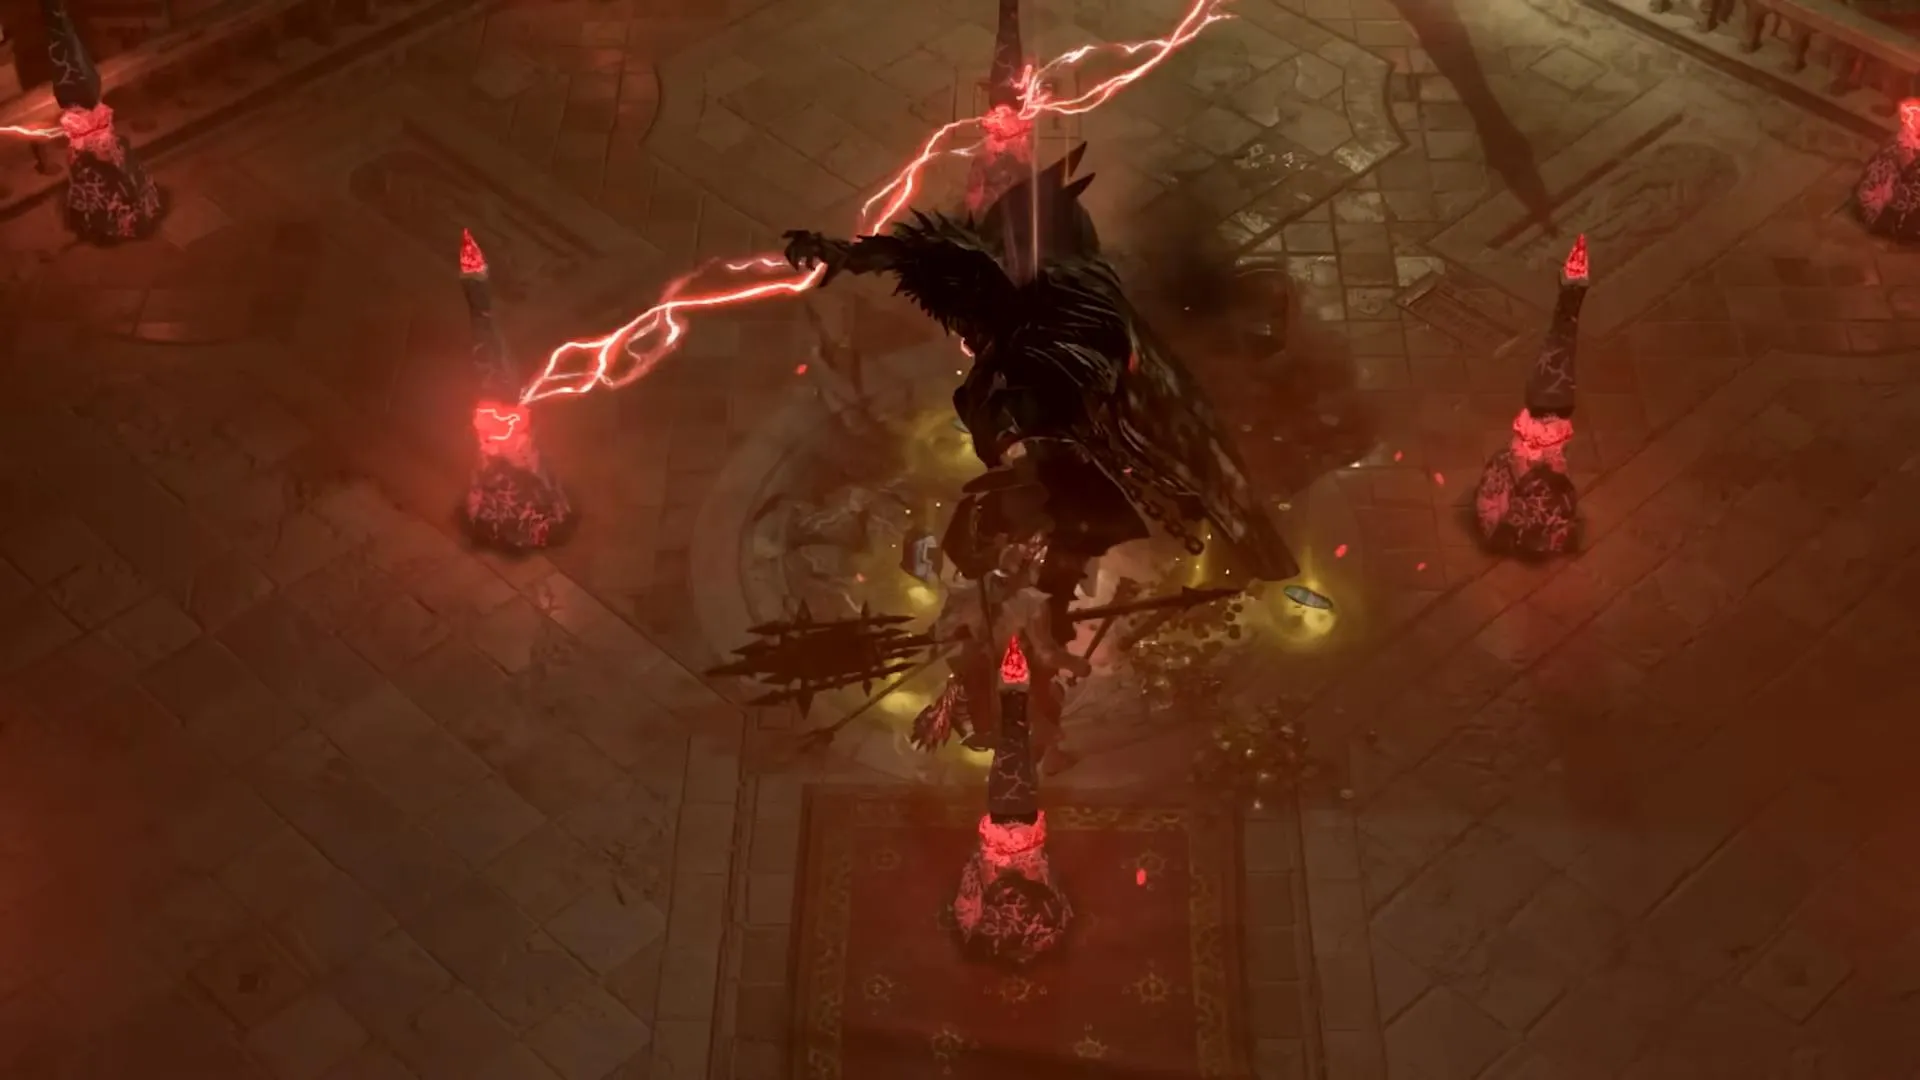 Lords of the Fallen 'The Way of the Bucket' Update Rebalances